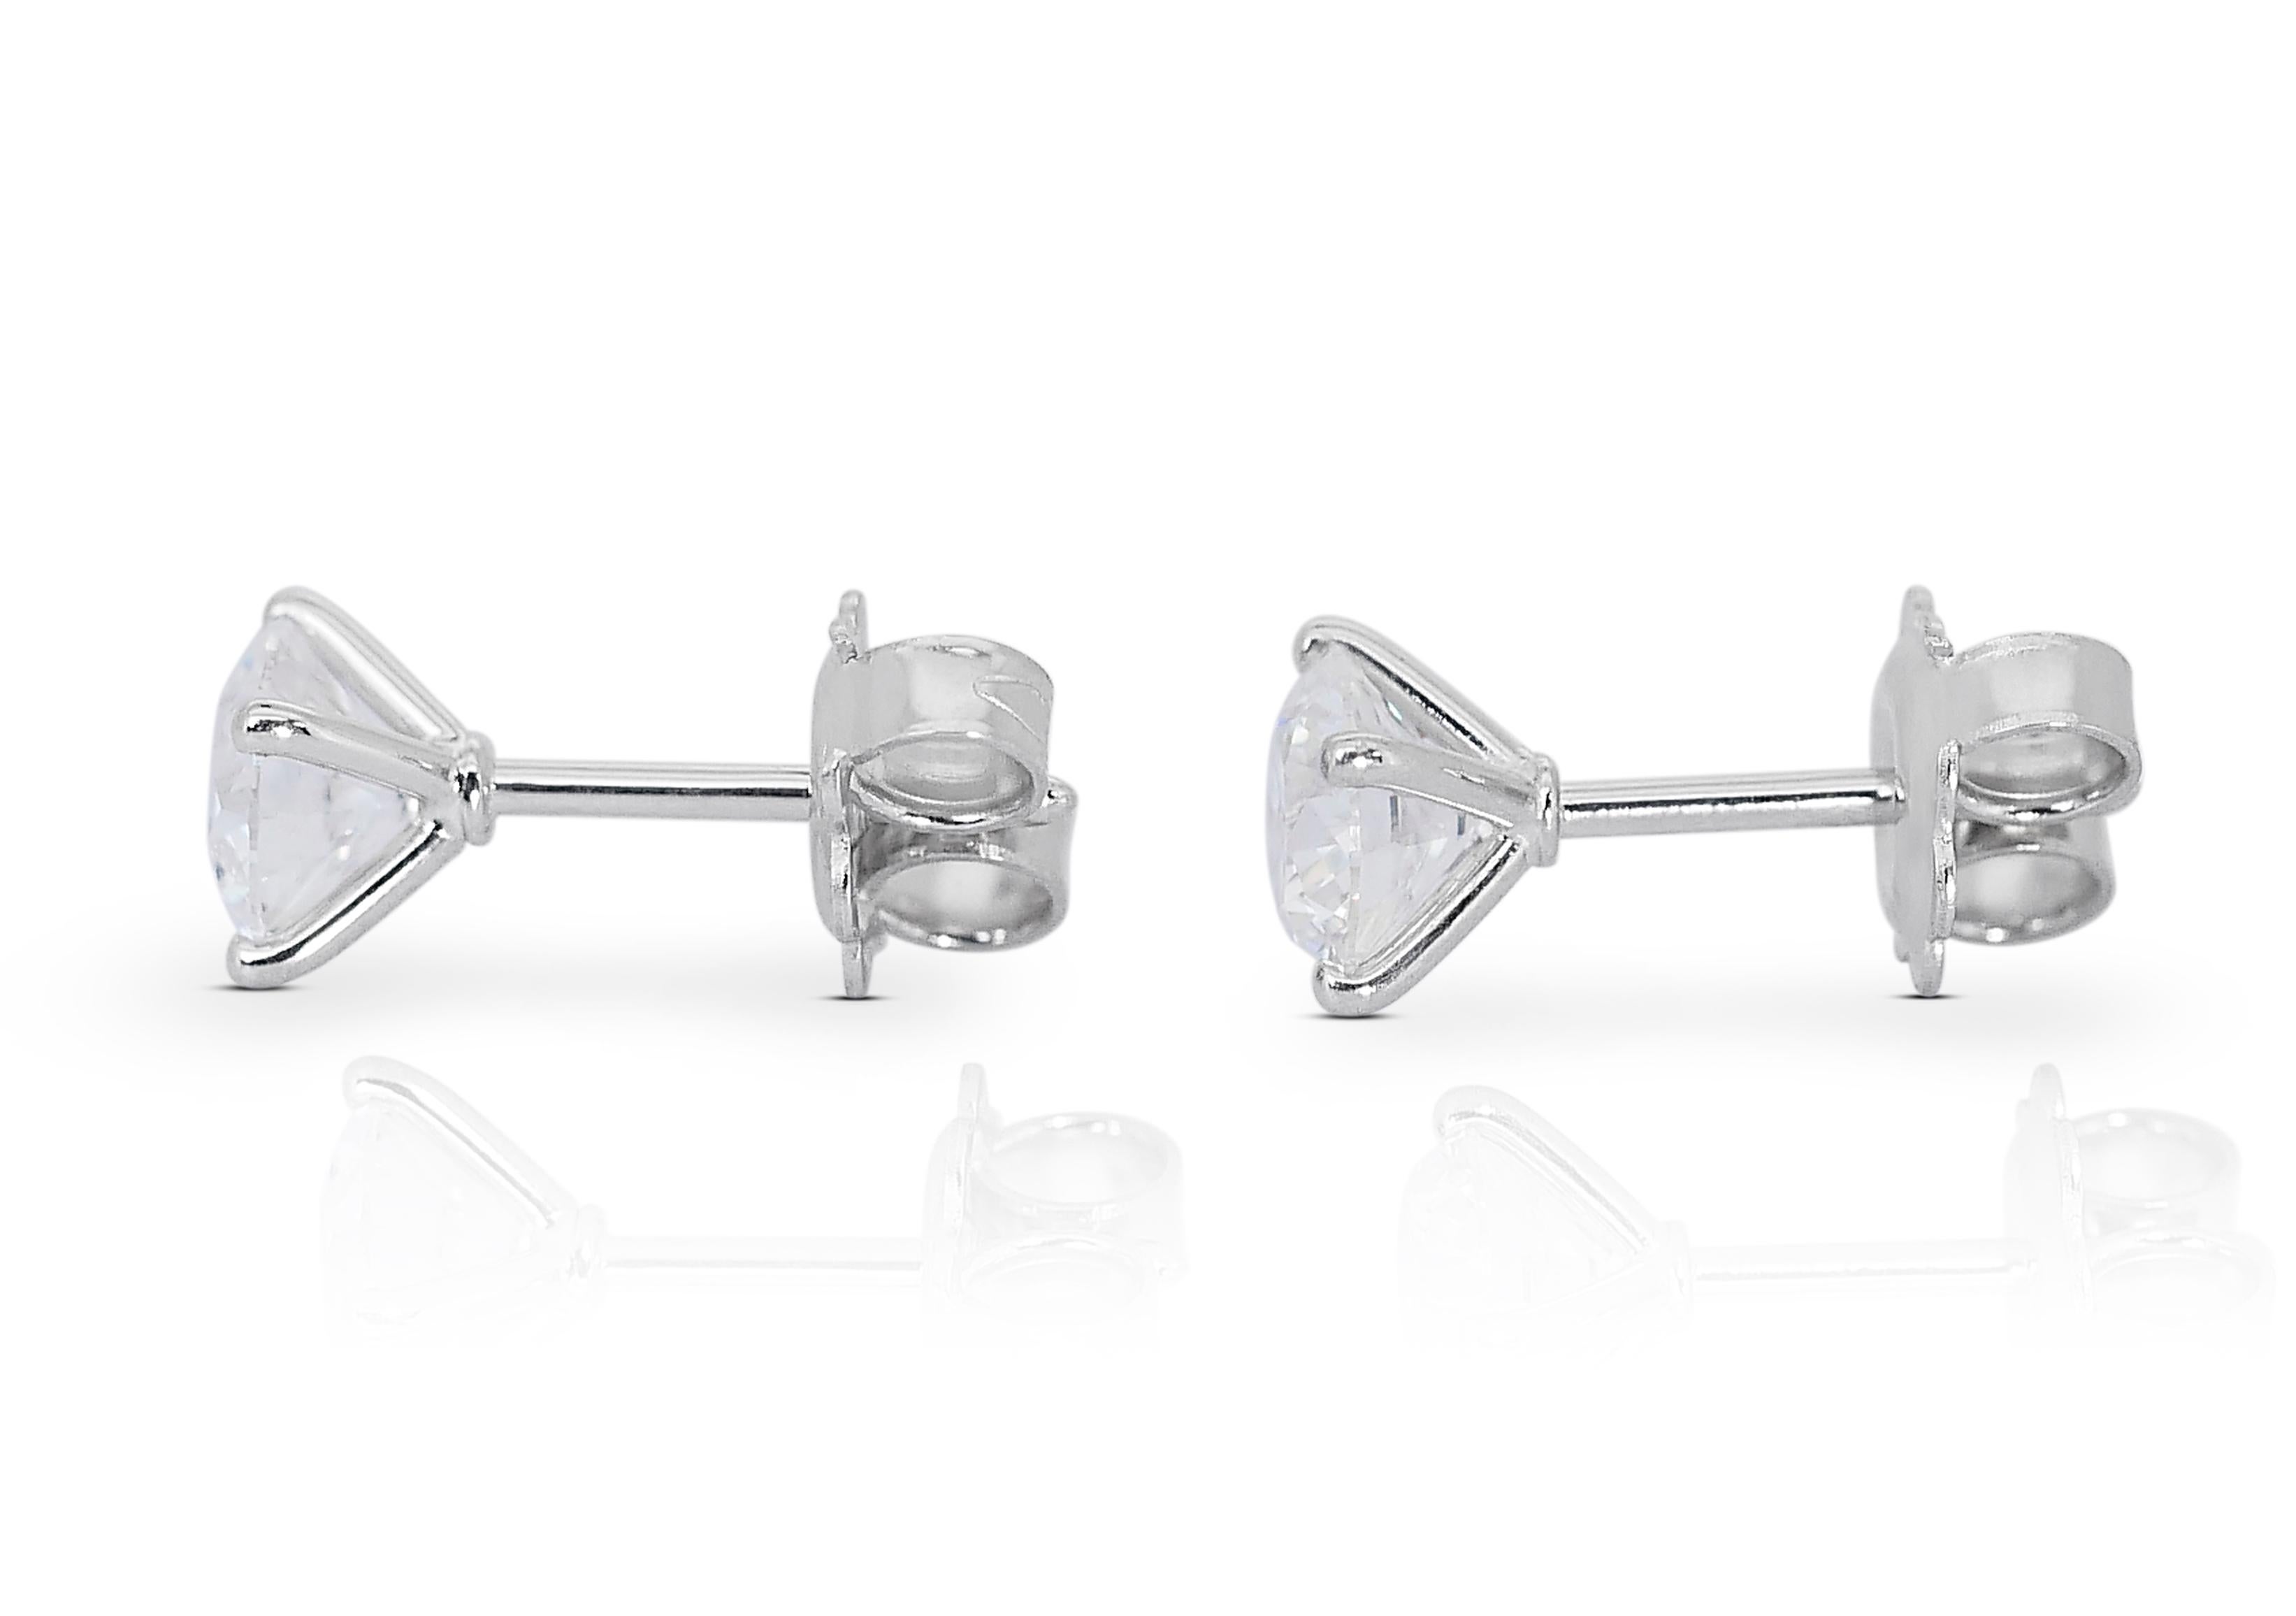 Spectacular 2.06ct Diamond Stud Earrings in 18k White Gold - GIA Certified For Sale 4